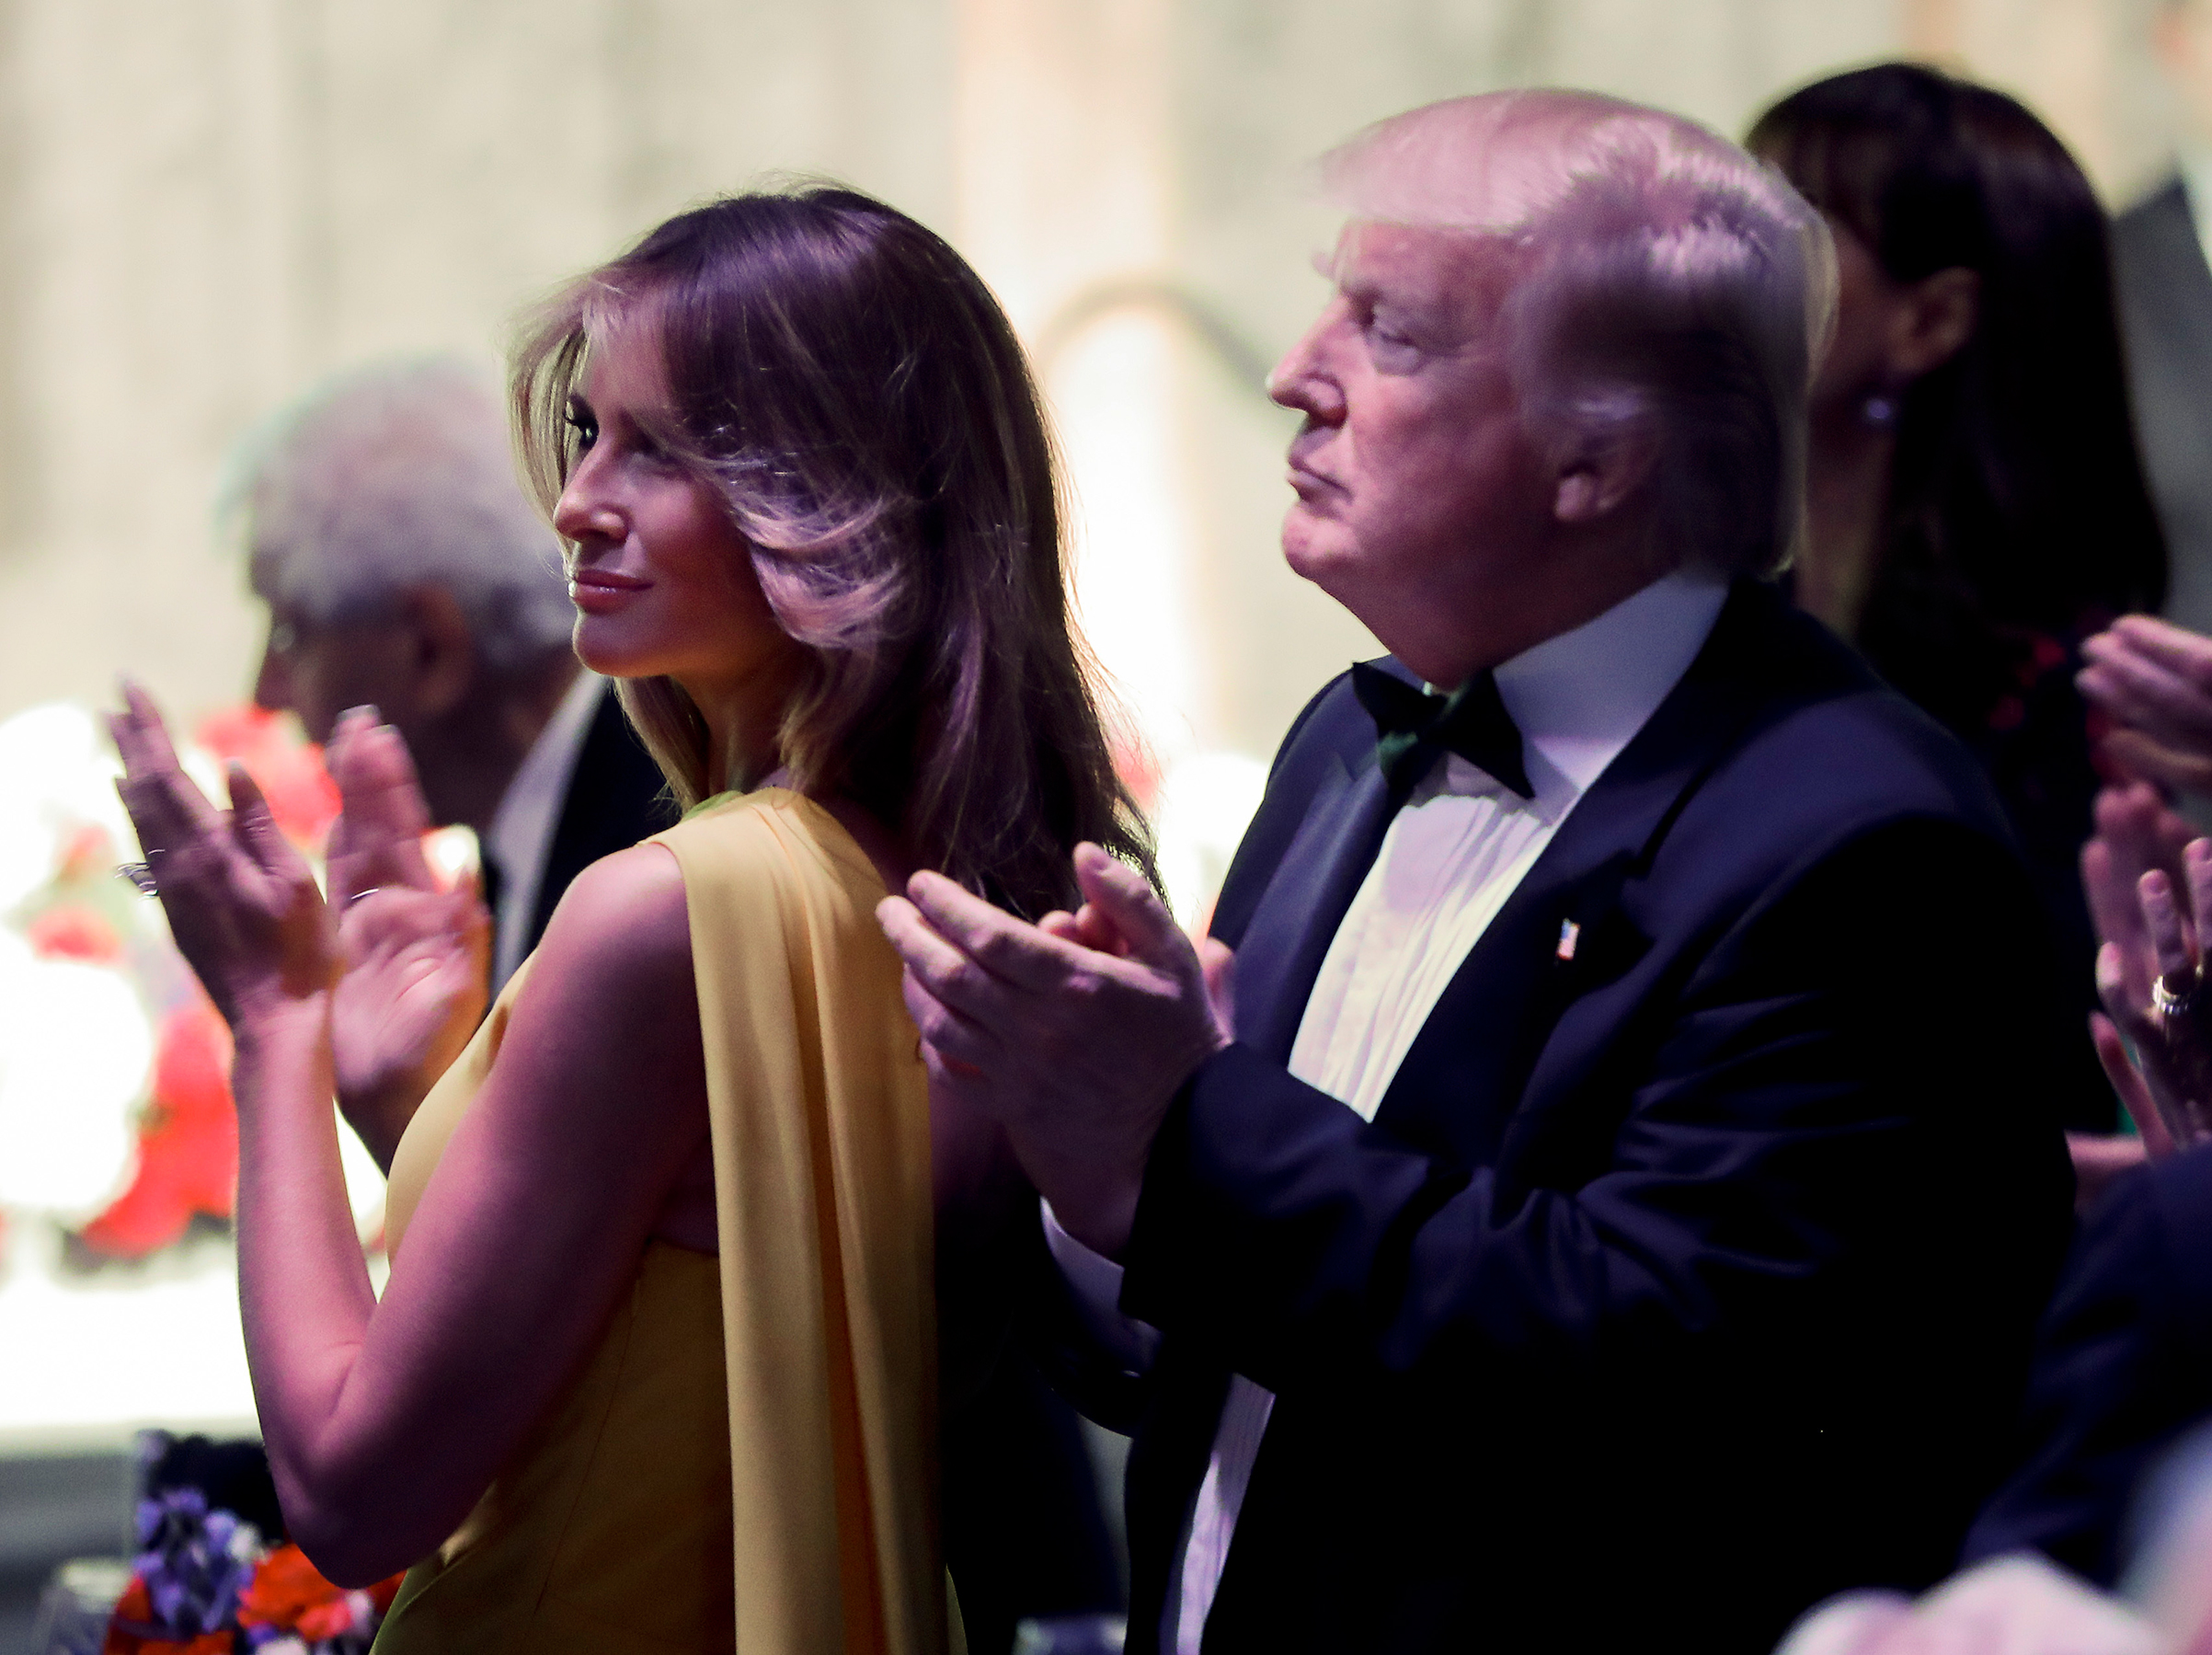 President Trump and first lady Melania Trump wearing yellow Dior gown applaud at dinner with Australian Prime Minister Malcolm Turnbull aboard the USS Intrepid, in New York CIty, May 4, 2017.